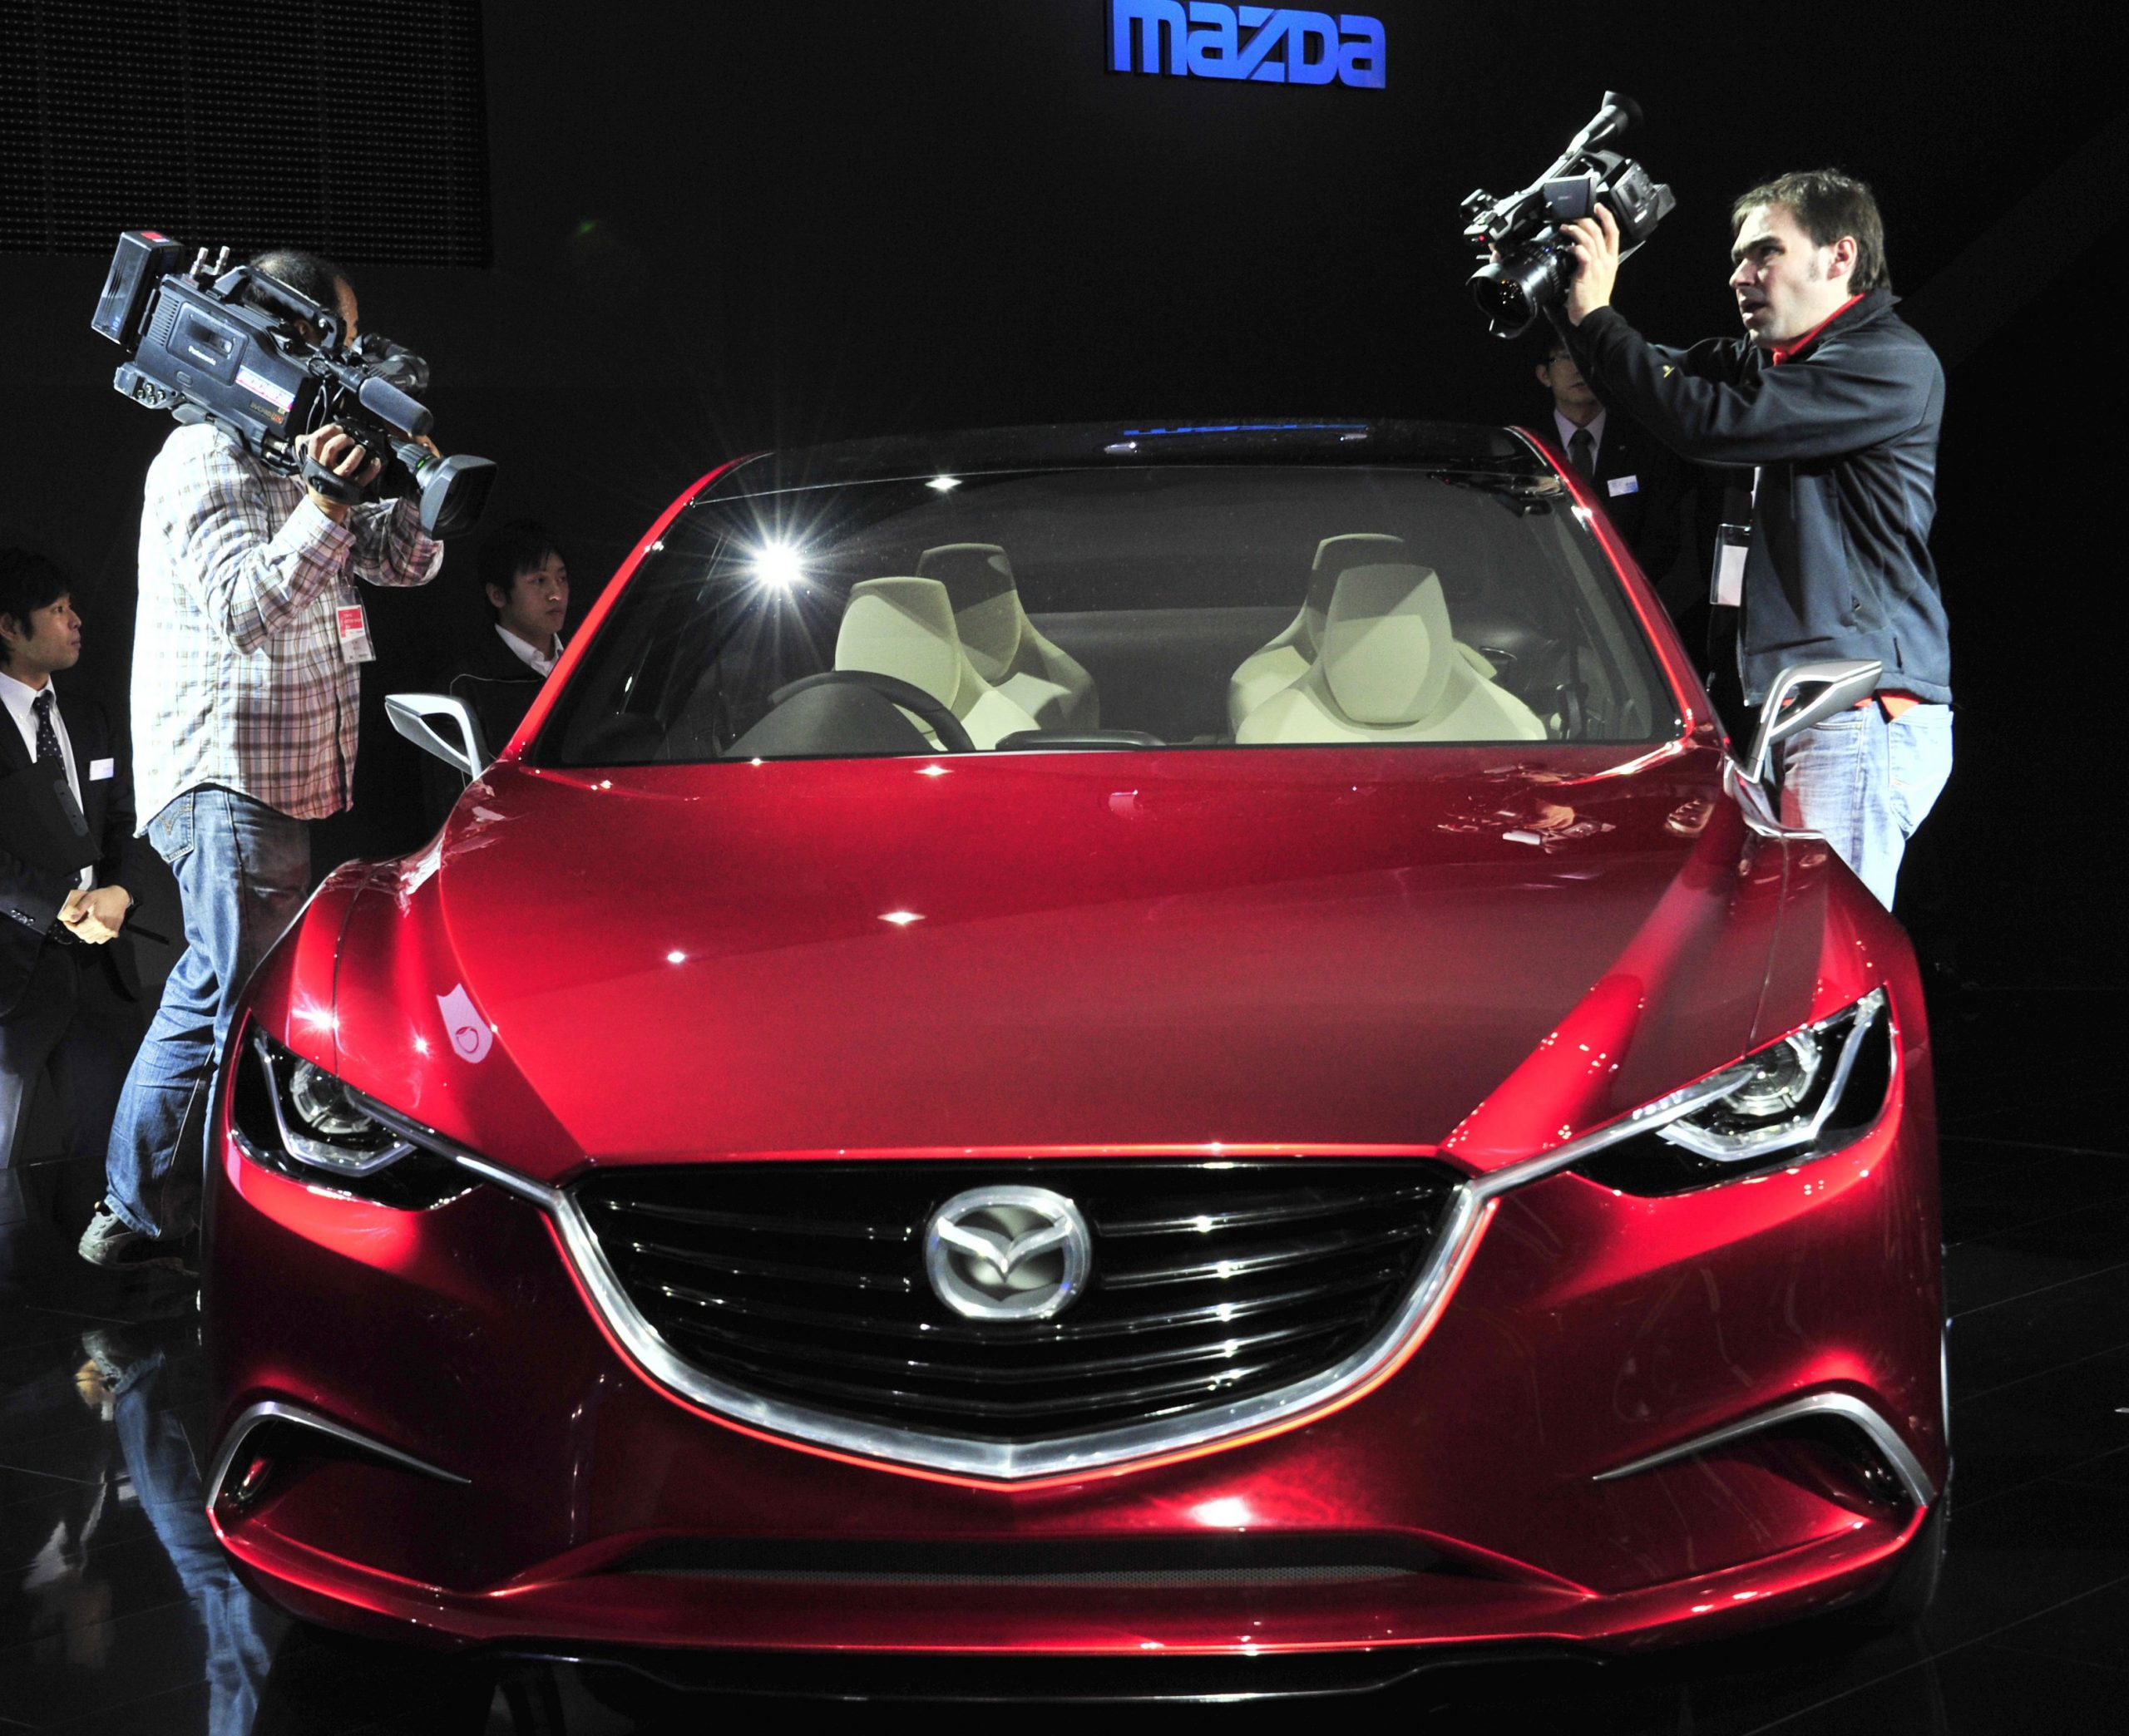 A Mazda diesel car on display t an auto show